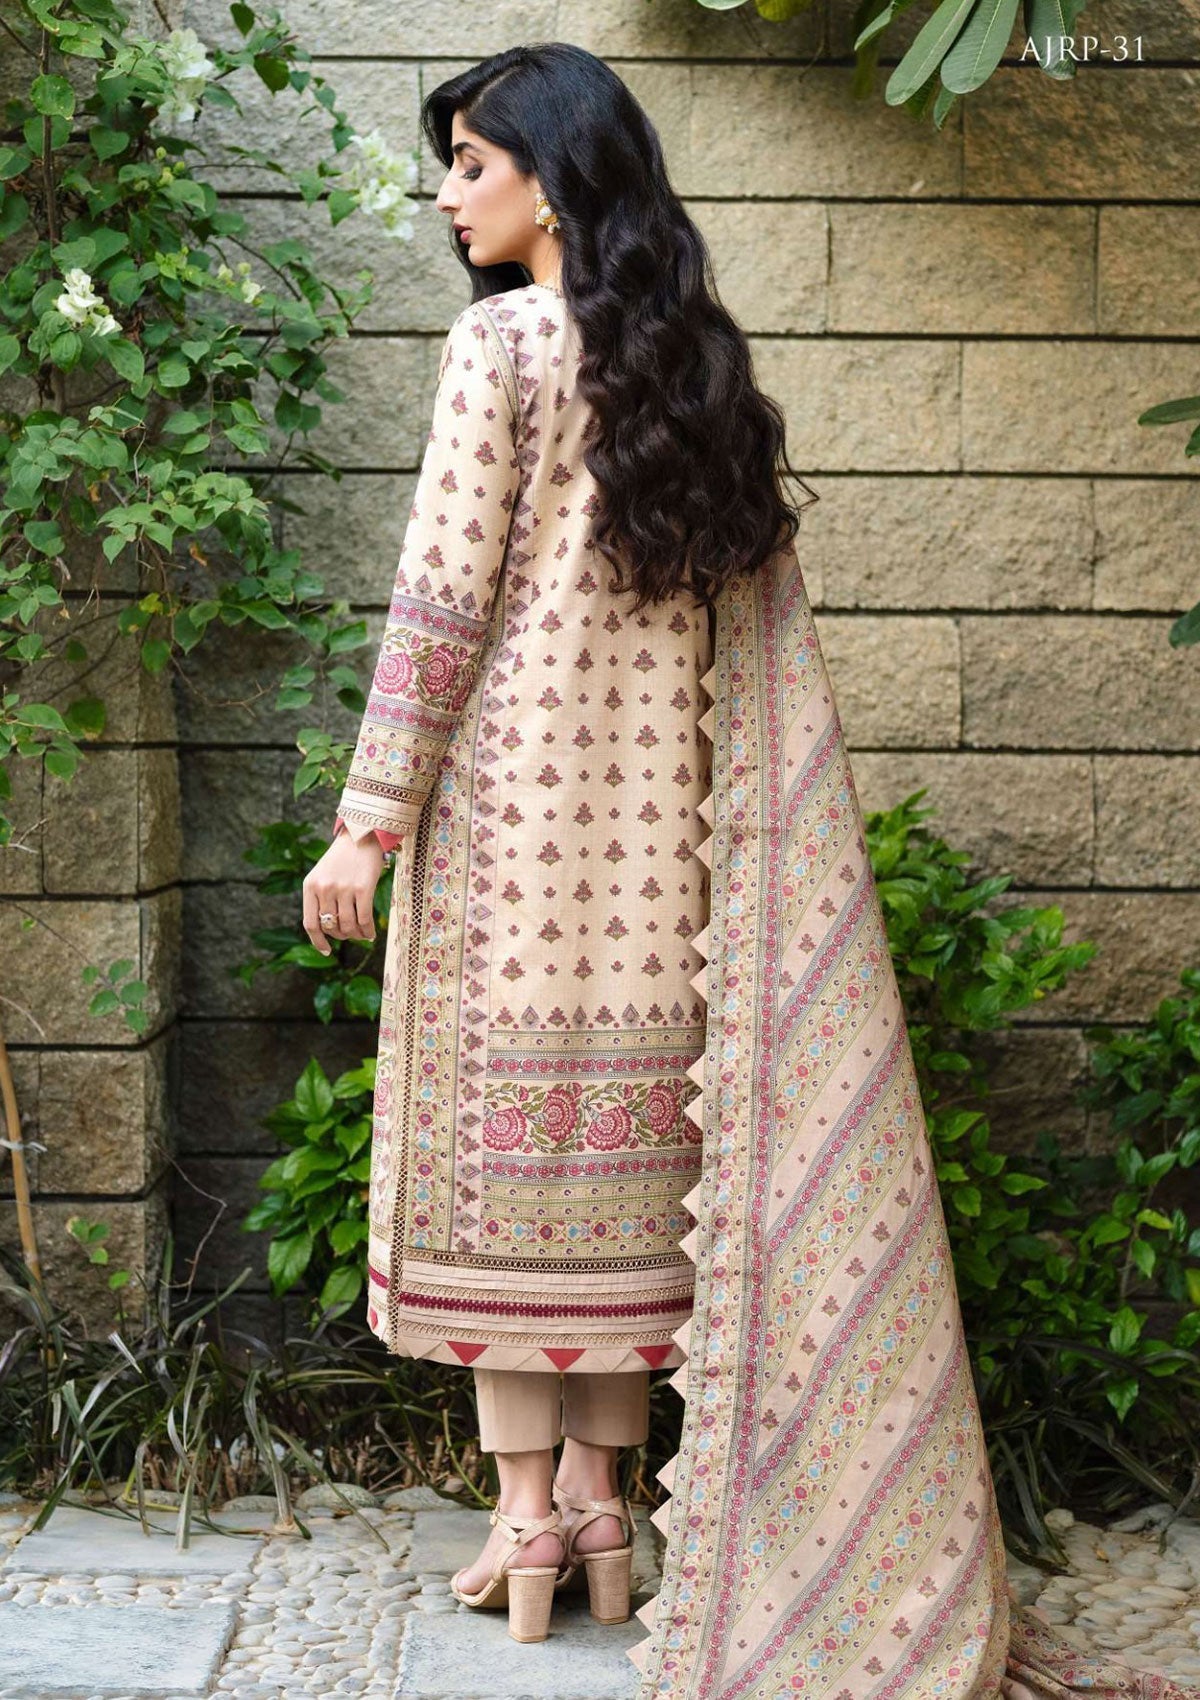 Lawn Collection - Asim Jofa - Rania - AJRP#31 available at Saleem Fabrics Traditions